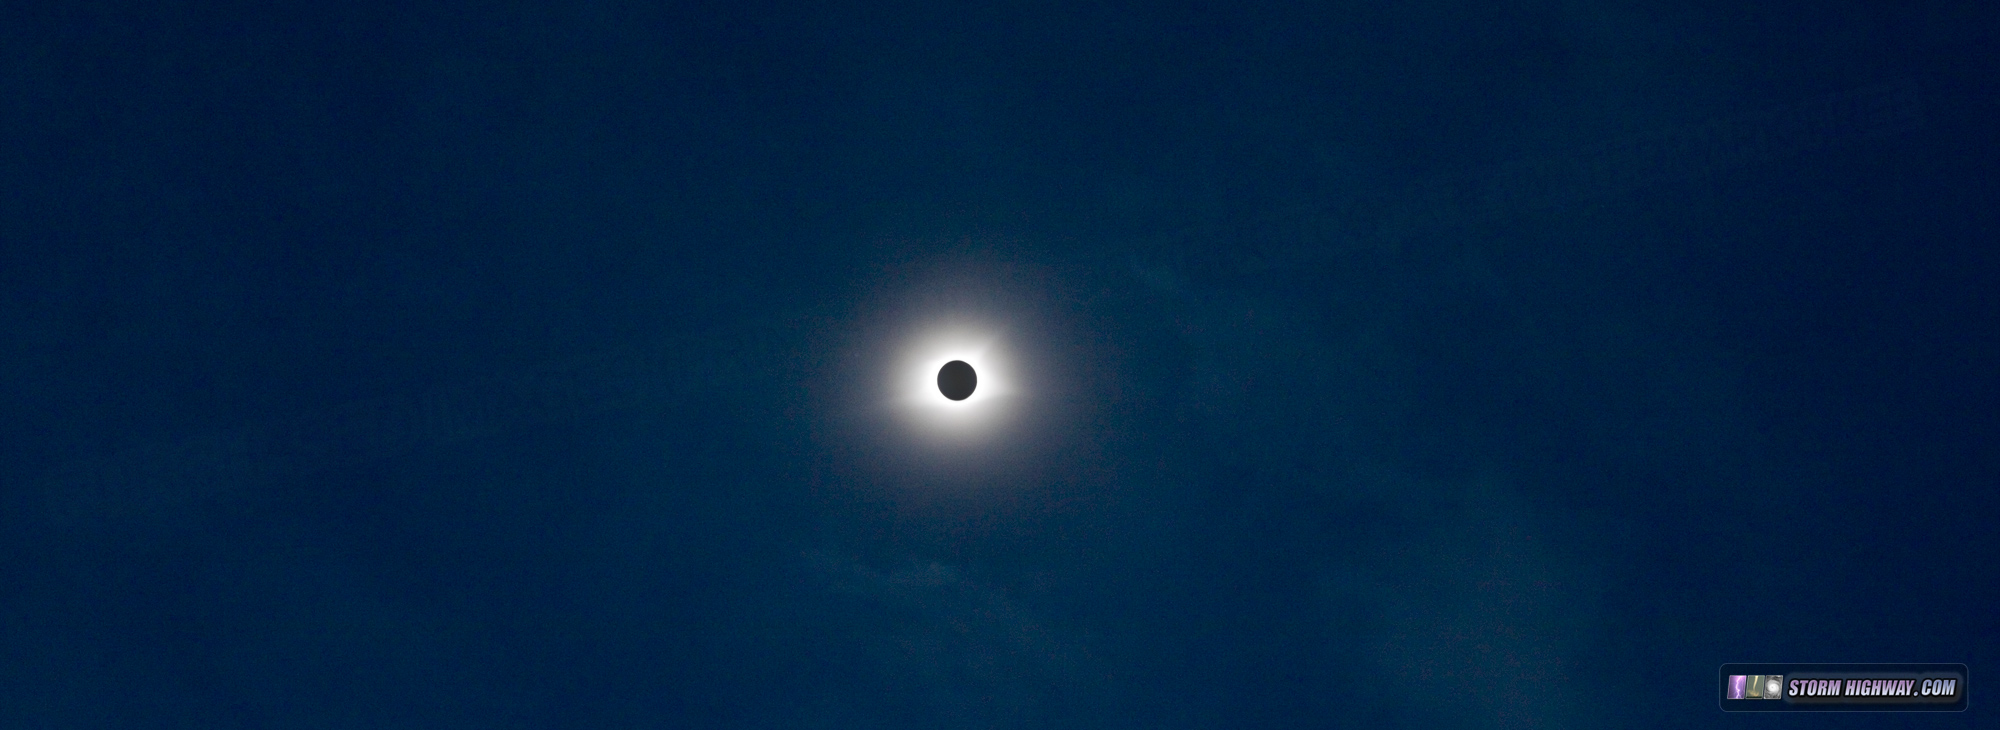 2017 total solar eclipse as viewed from southern Illinois